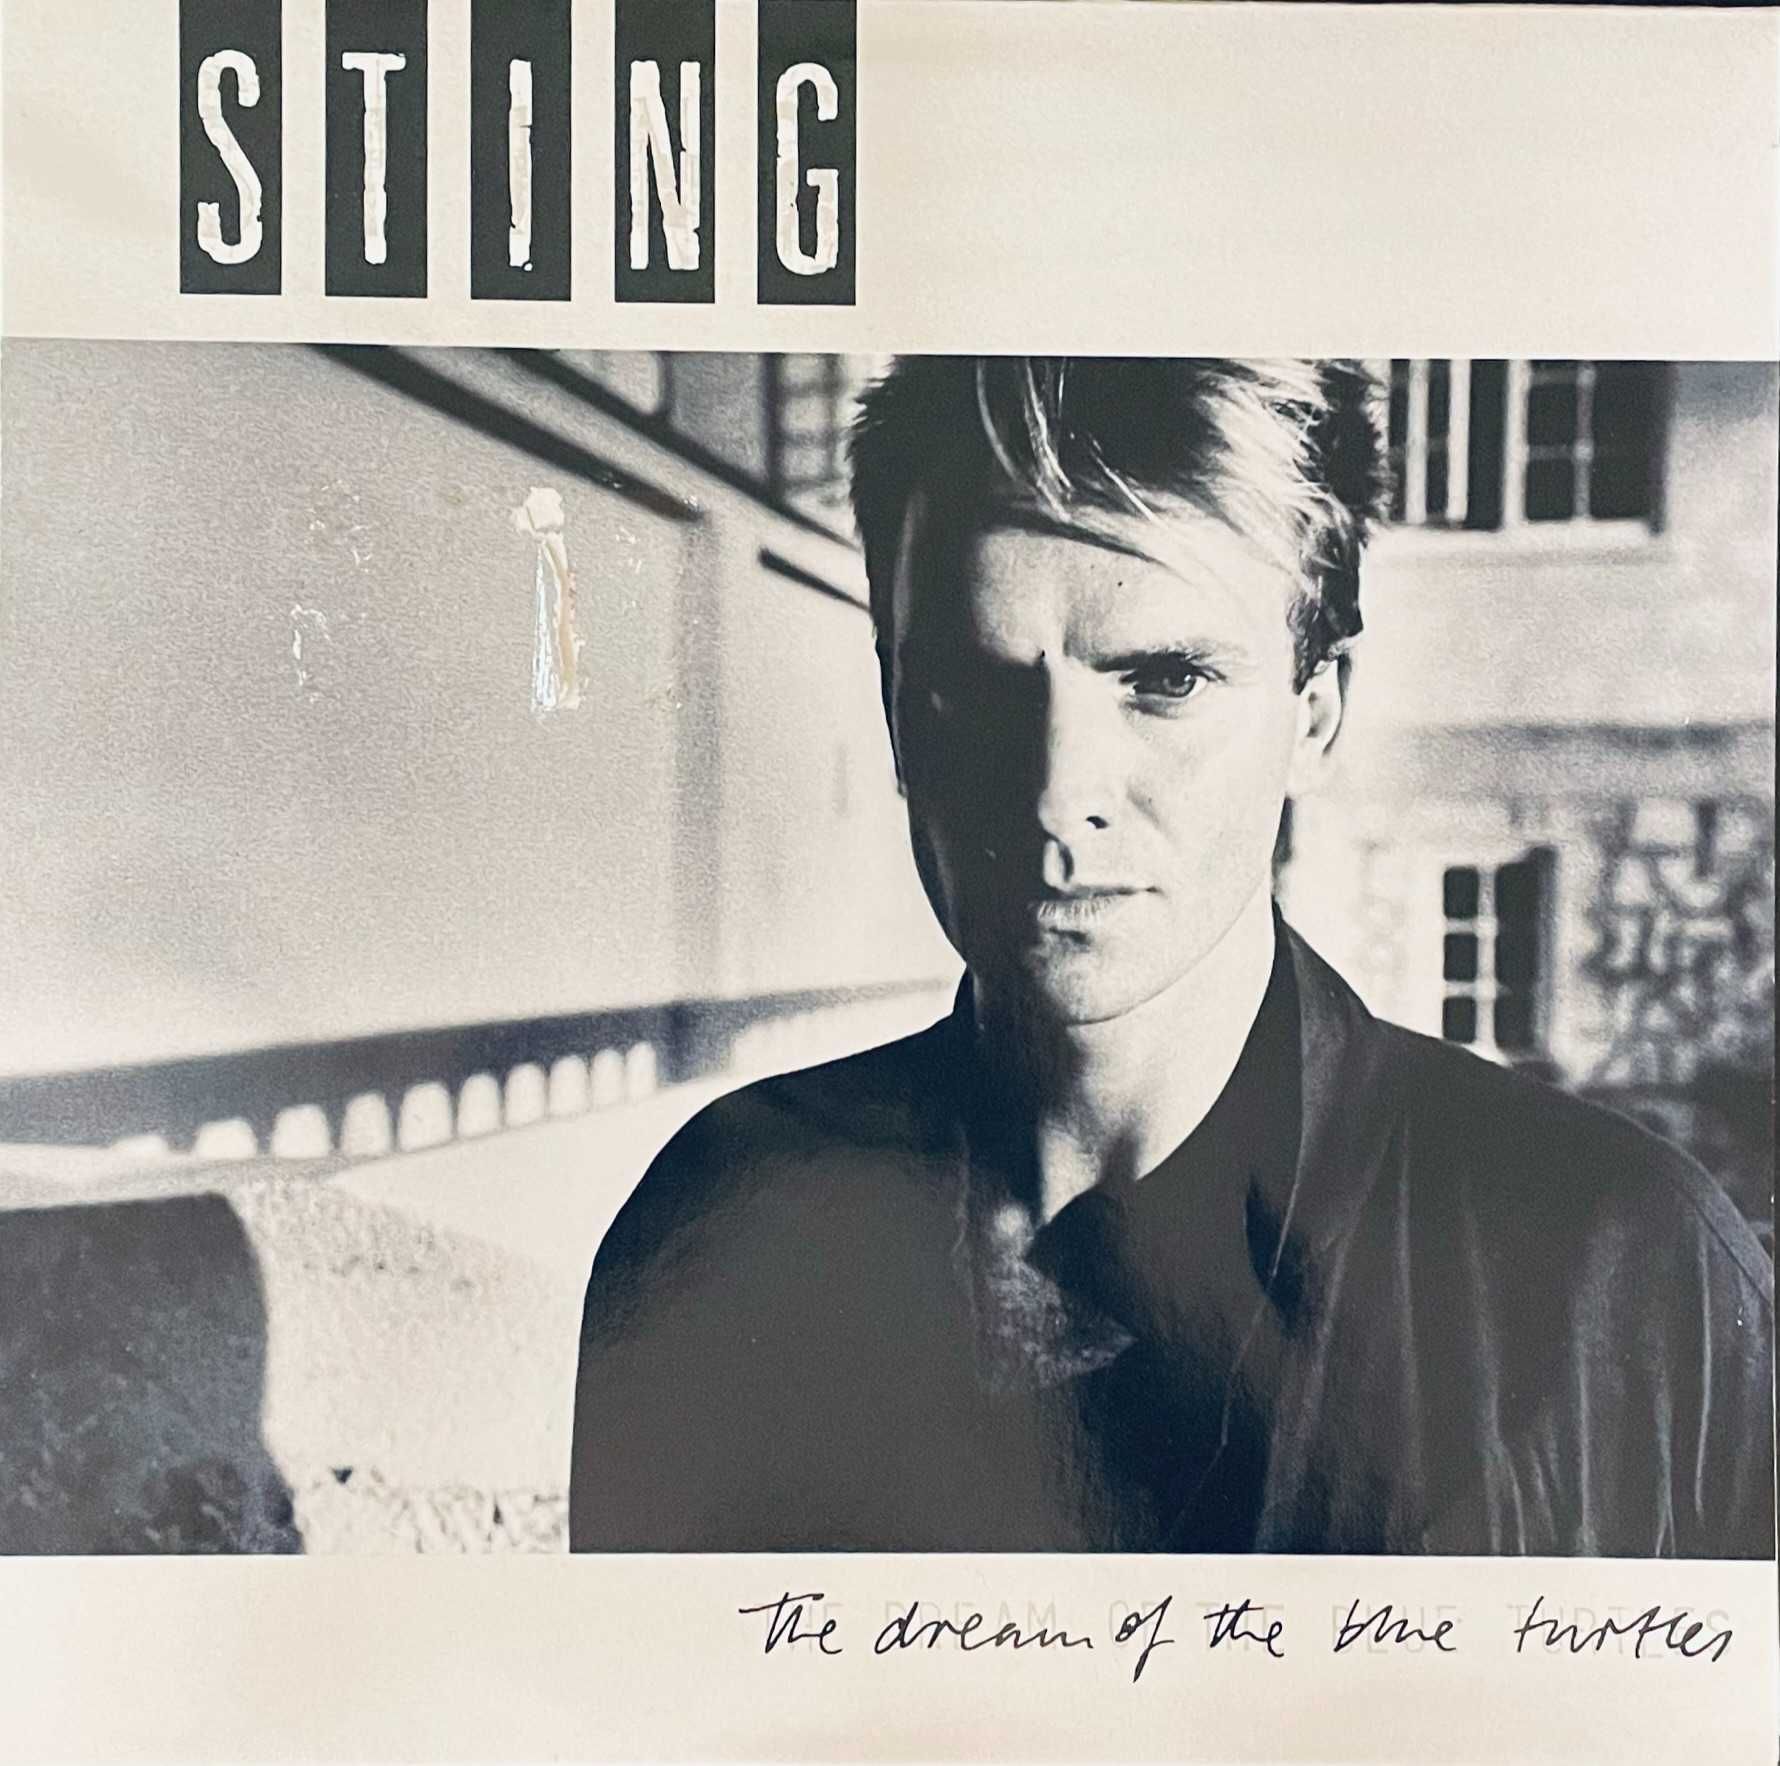 STING - The dream of the blue turtles [EX] wyd. 1985r.